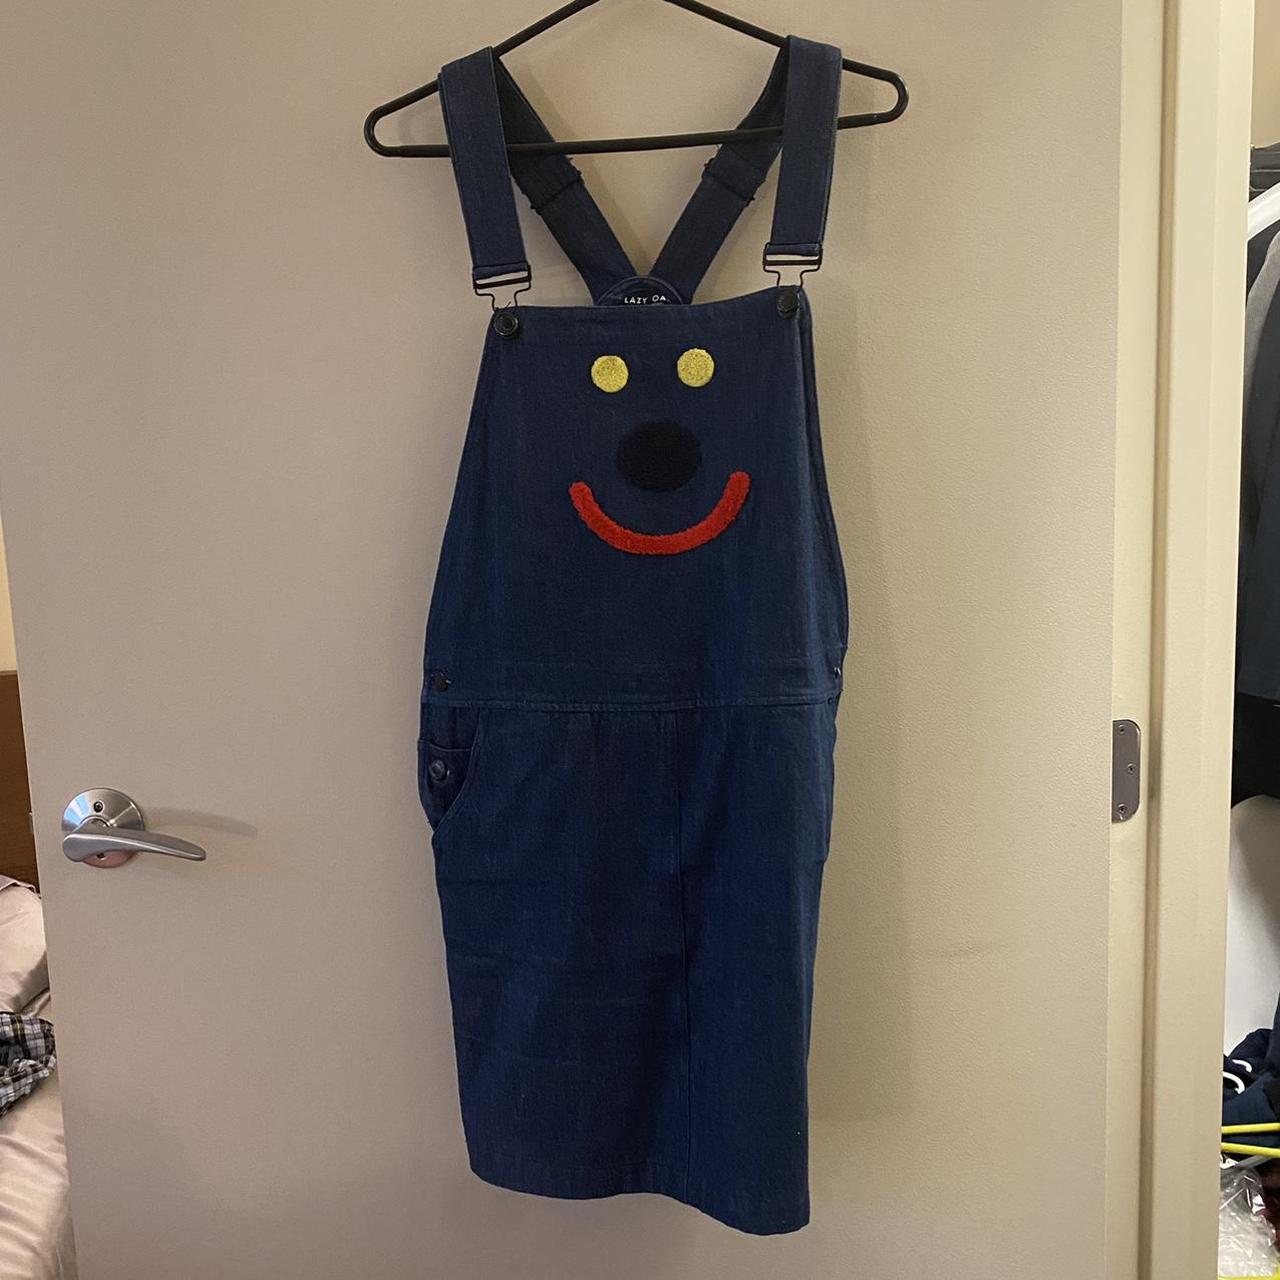 Product Image 1 - Lazy oaf denim overall
Worn a